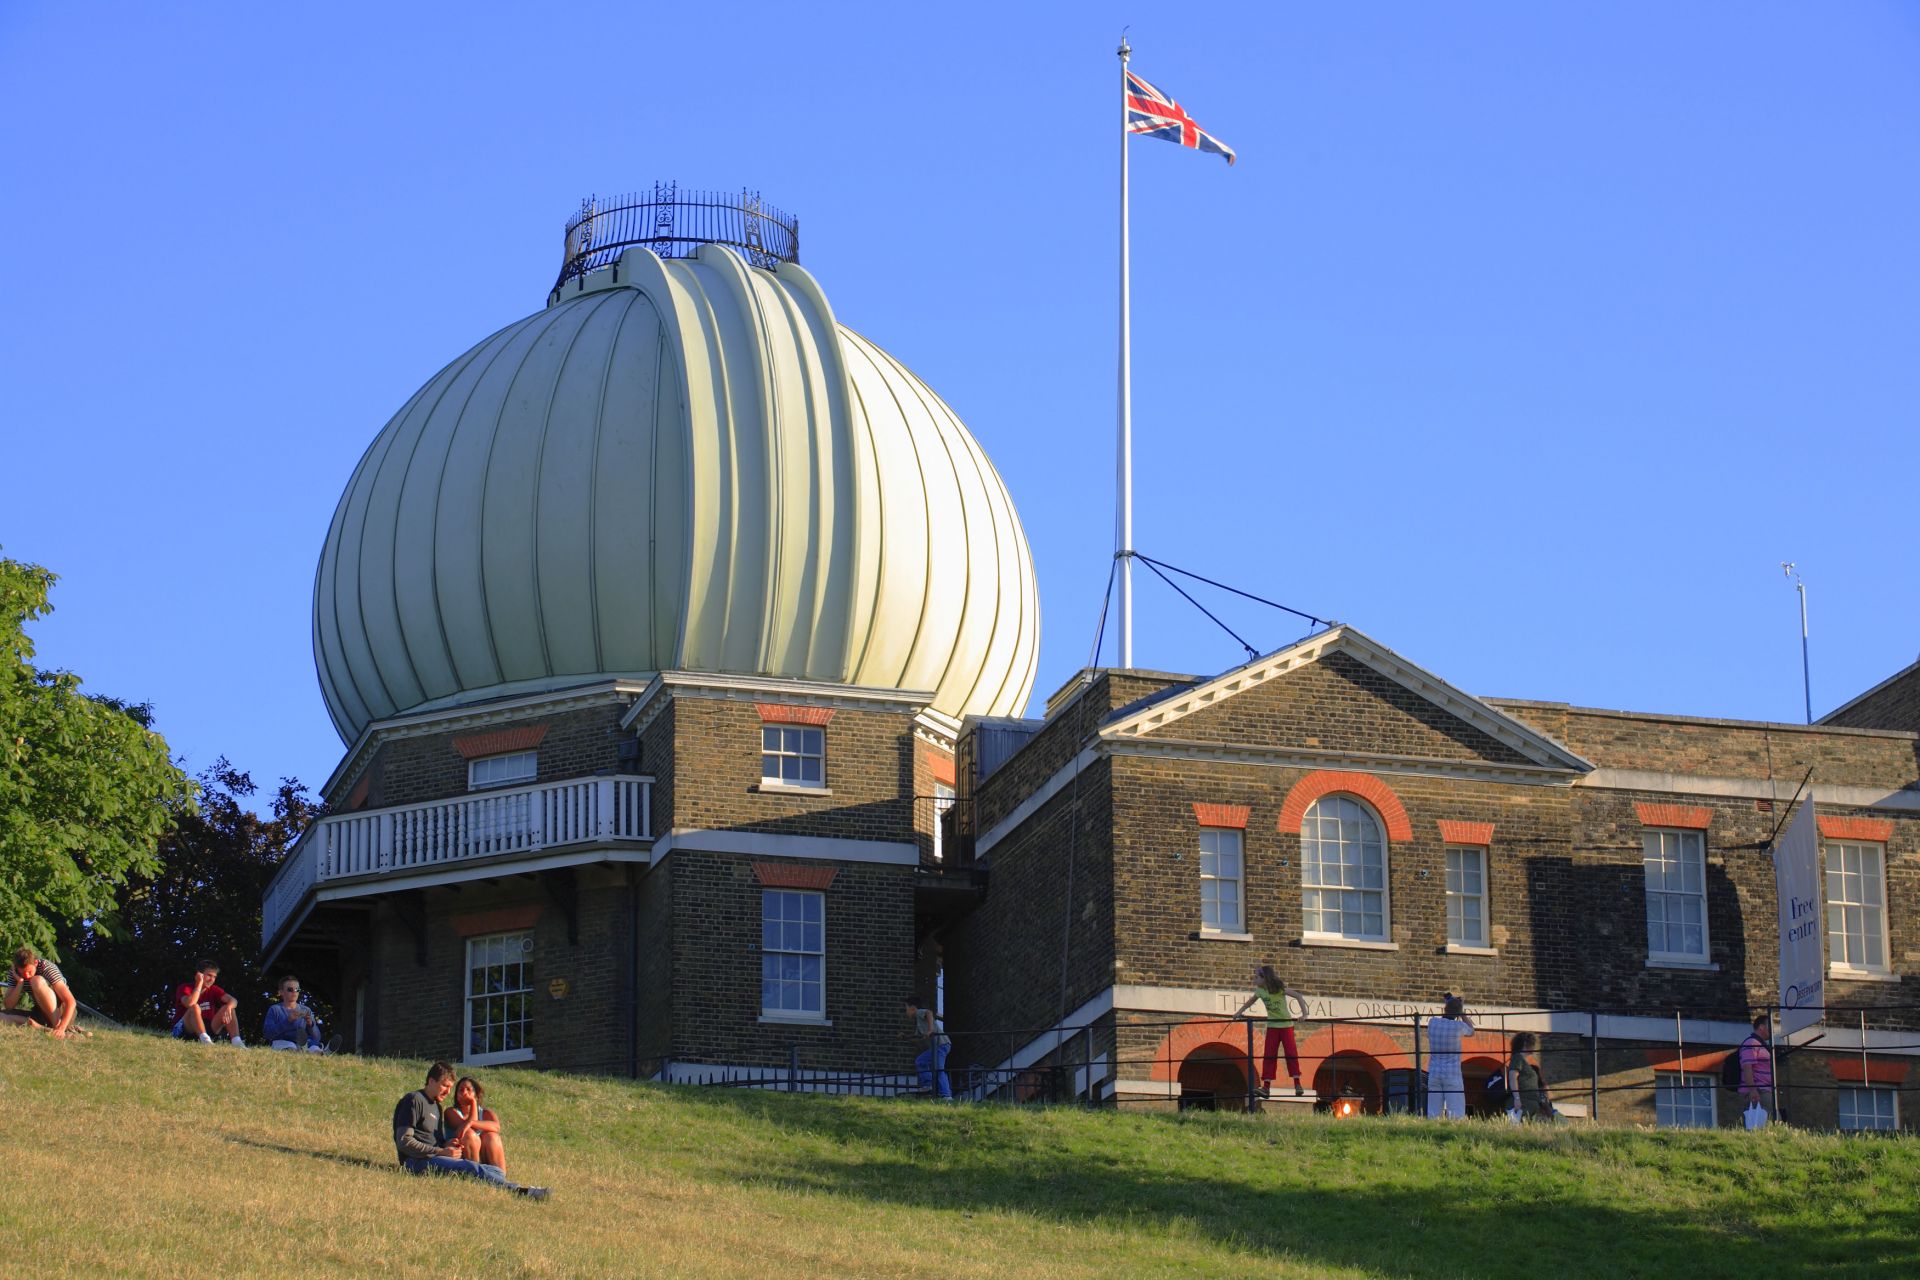 visit the greenwich observatory